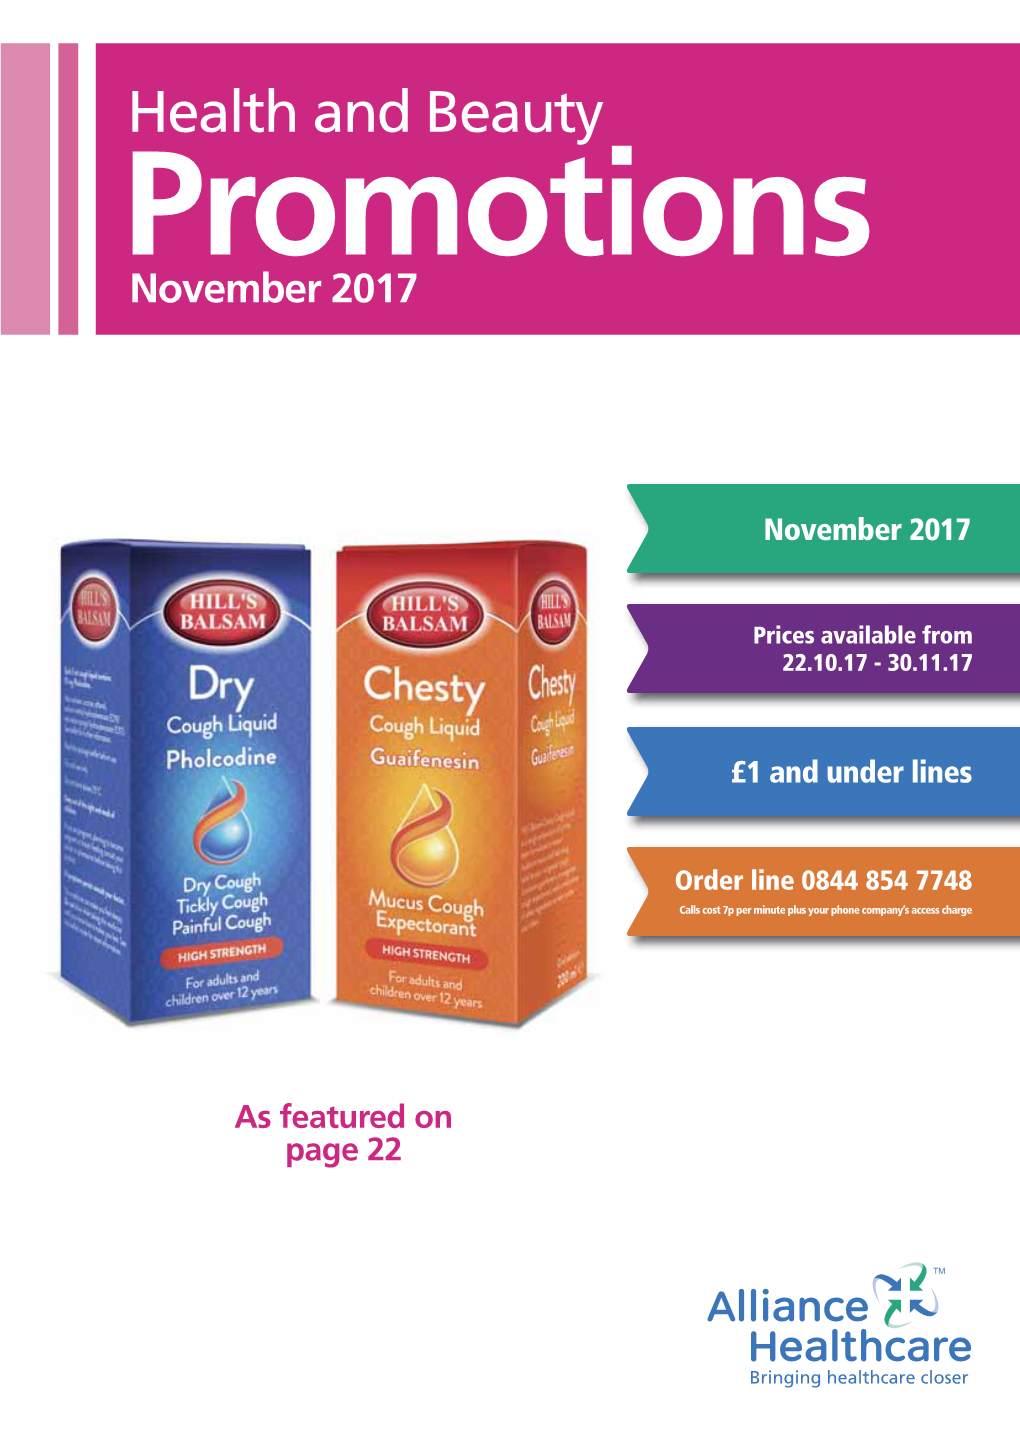 Health and Beauty Promotions November 2017